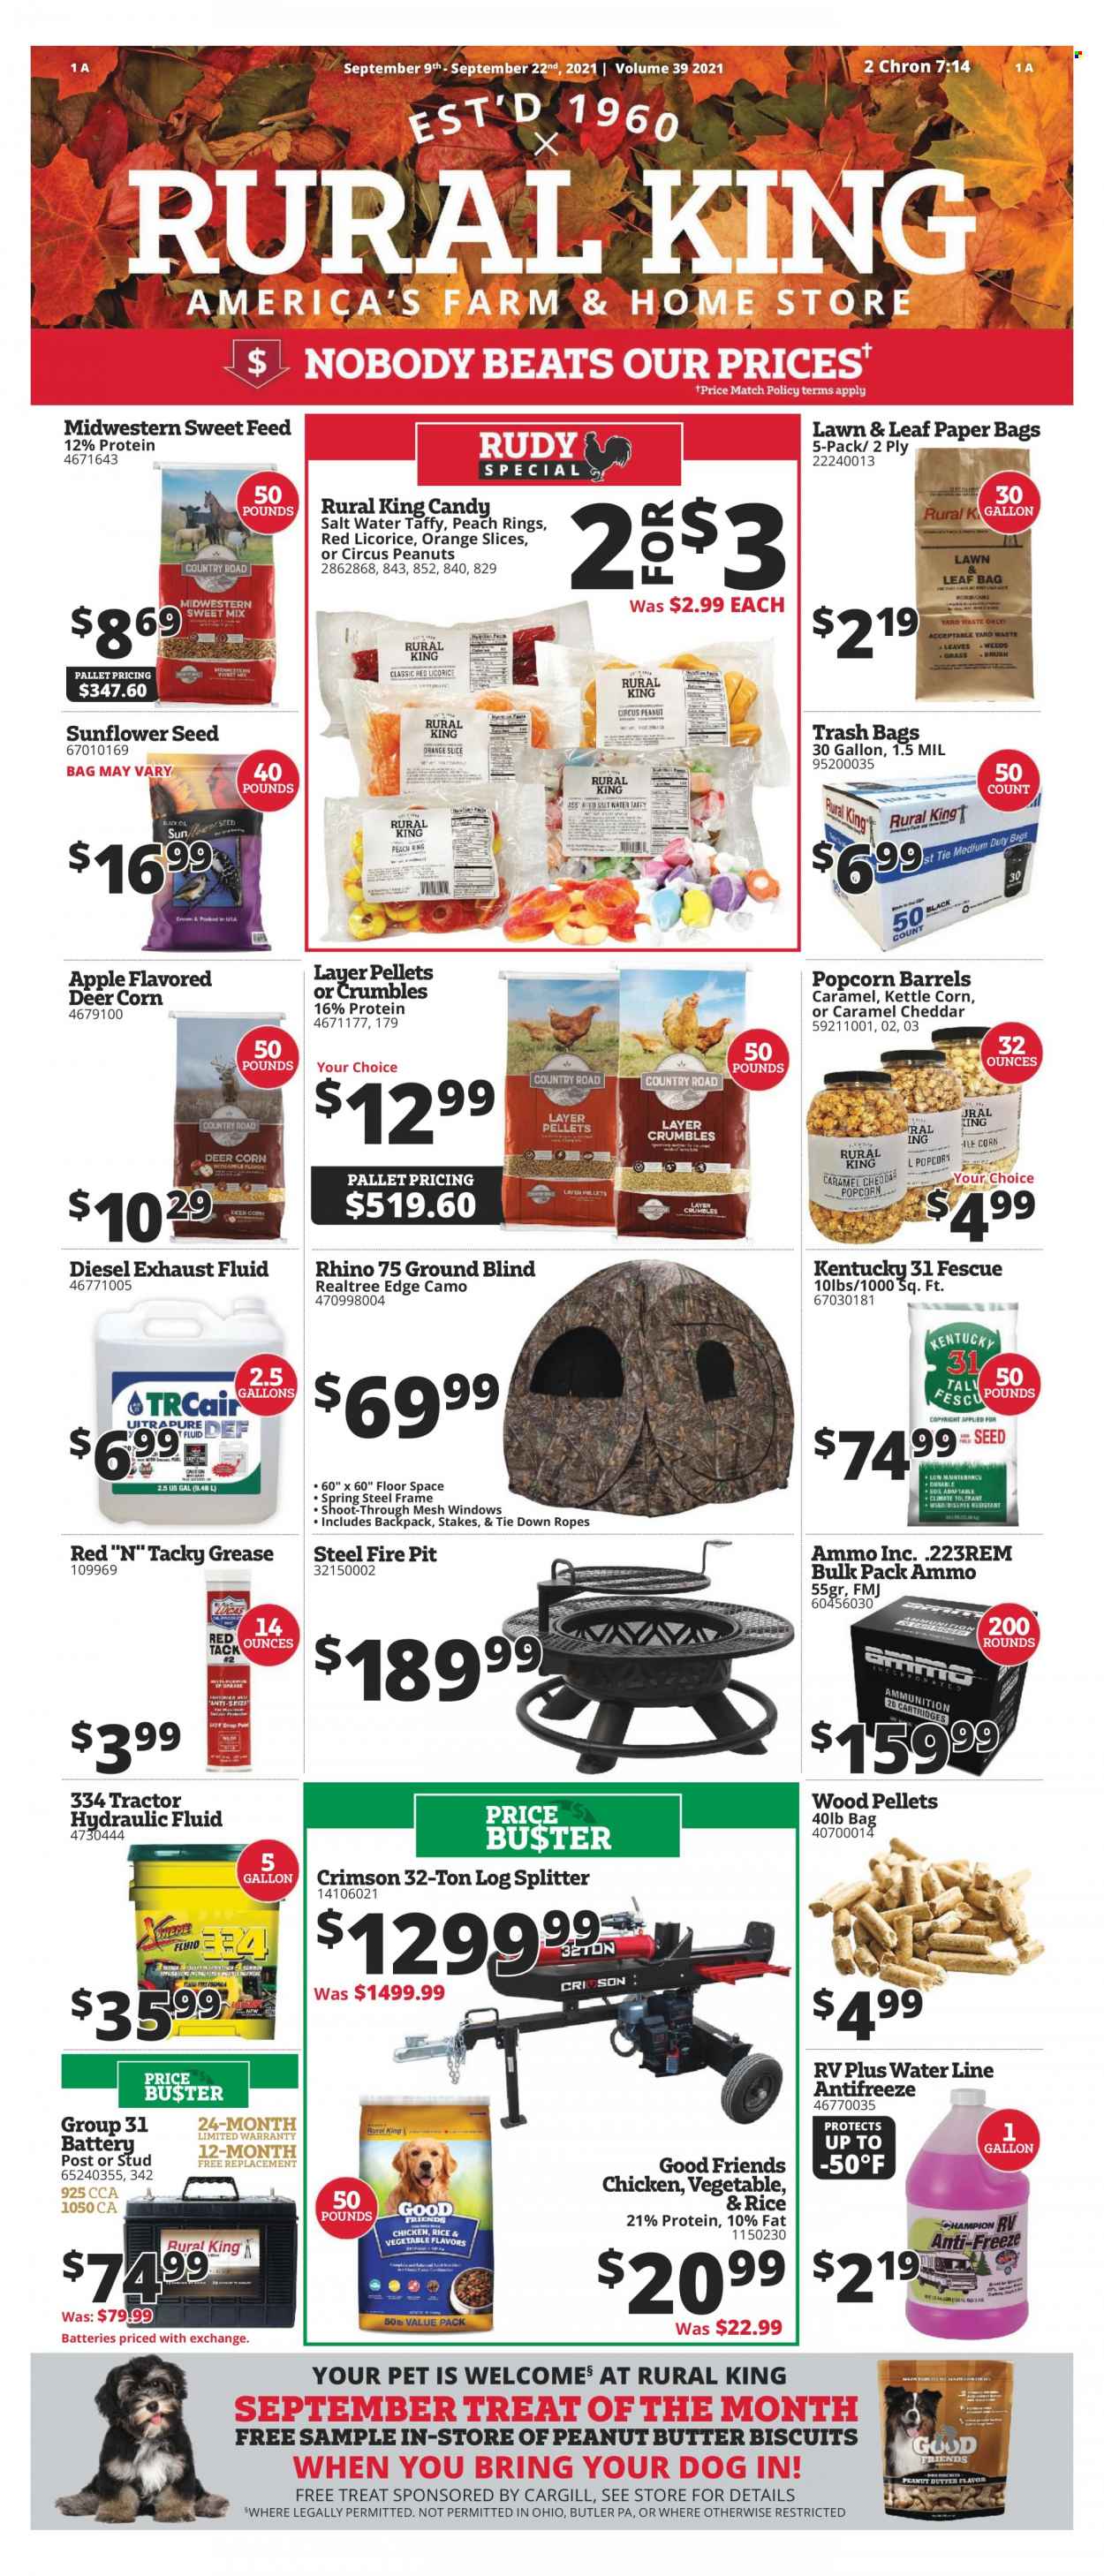 thumbnail - Rural King Flyer - 09/09/2021 - 09/22/2021 - Sales products - biscuit, kettle corn, popcorn, rice, peanut butter, peanuts, trash bags, gallon, plant seeds, Apple, hub blind, tractor, Rhino, log splitter, antifreeze, hydraulic fluids, exhaust fluid. Page 1.